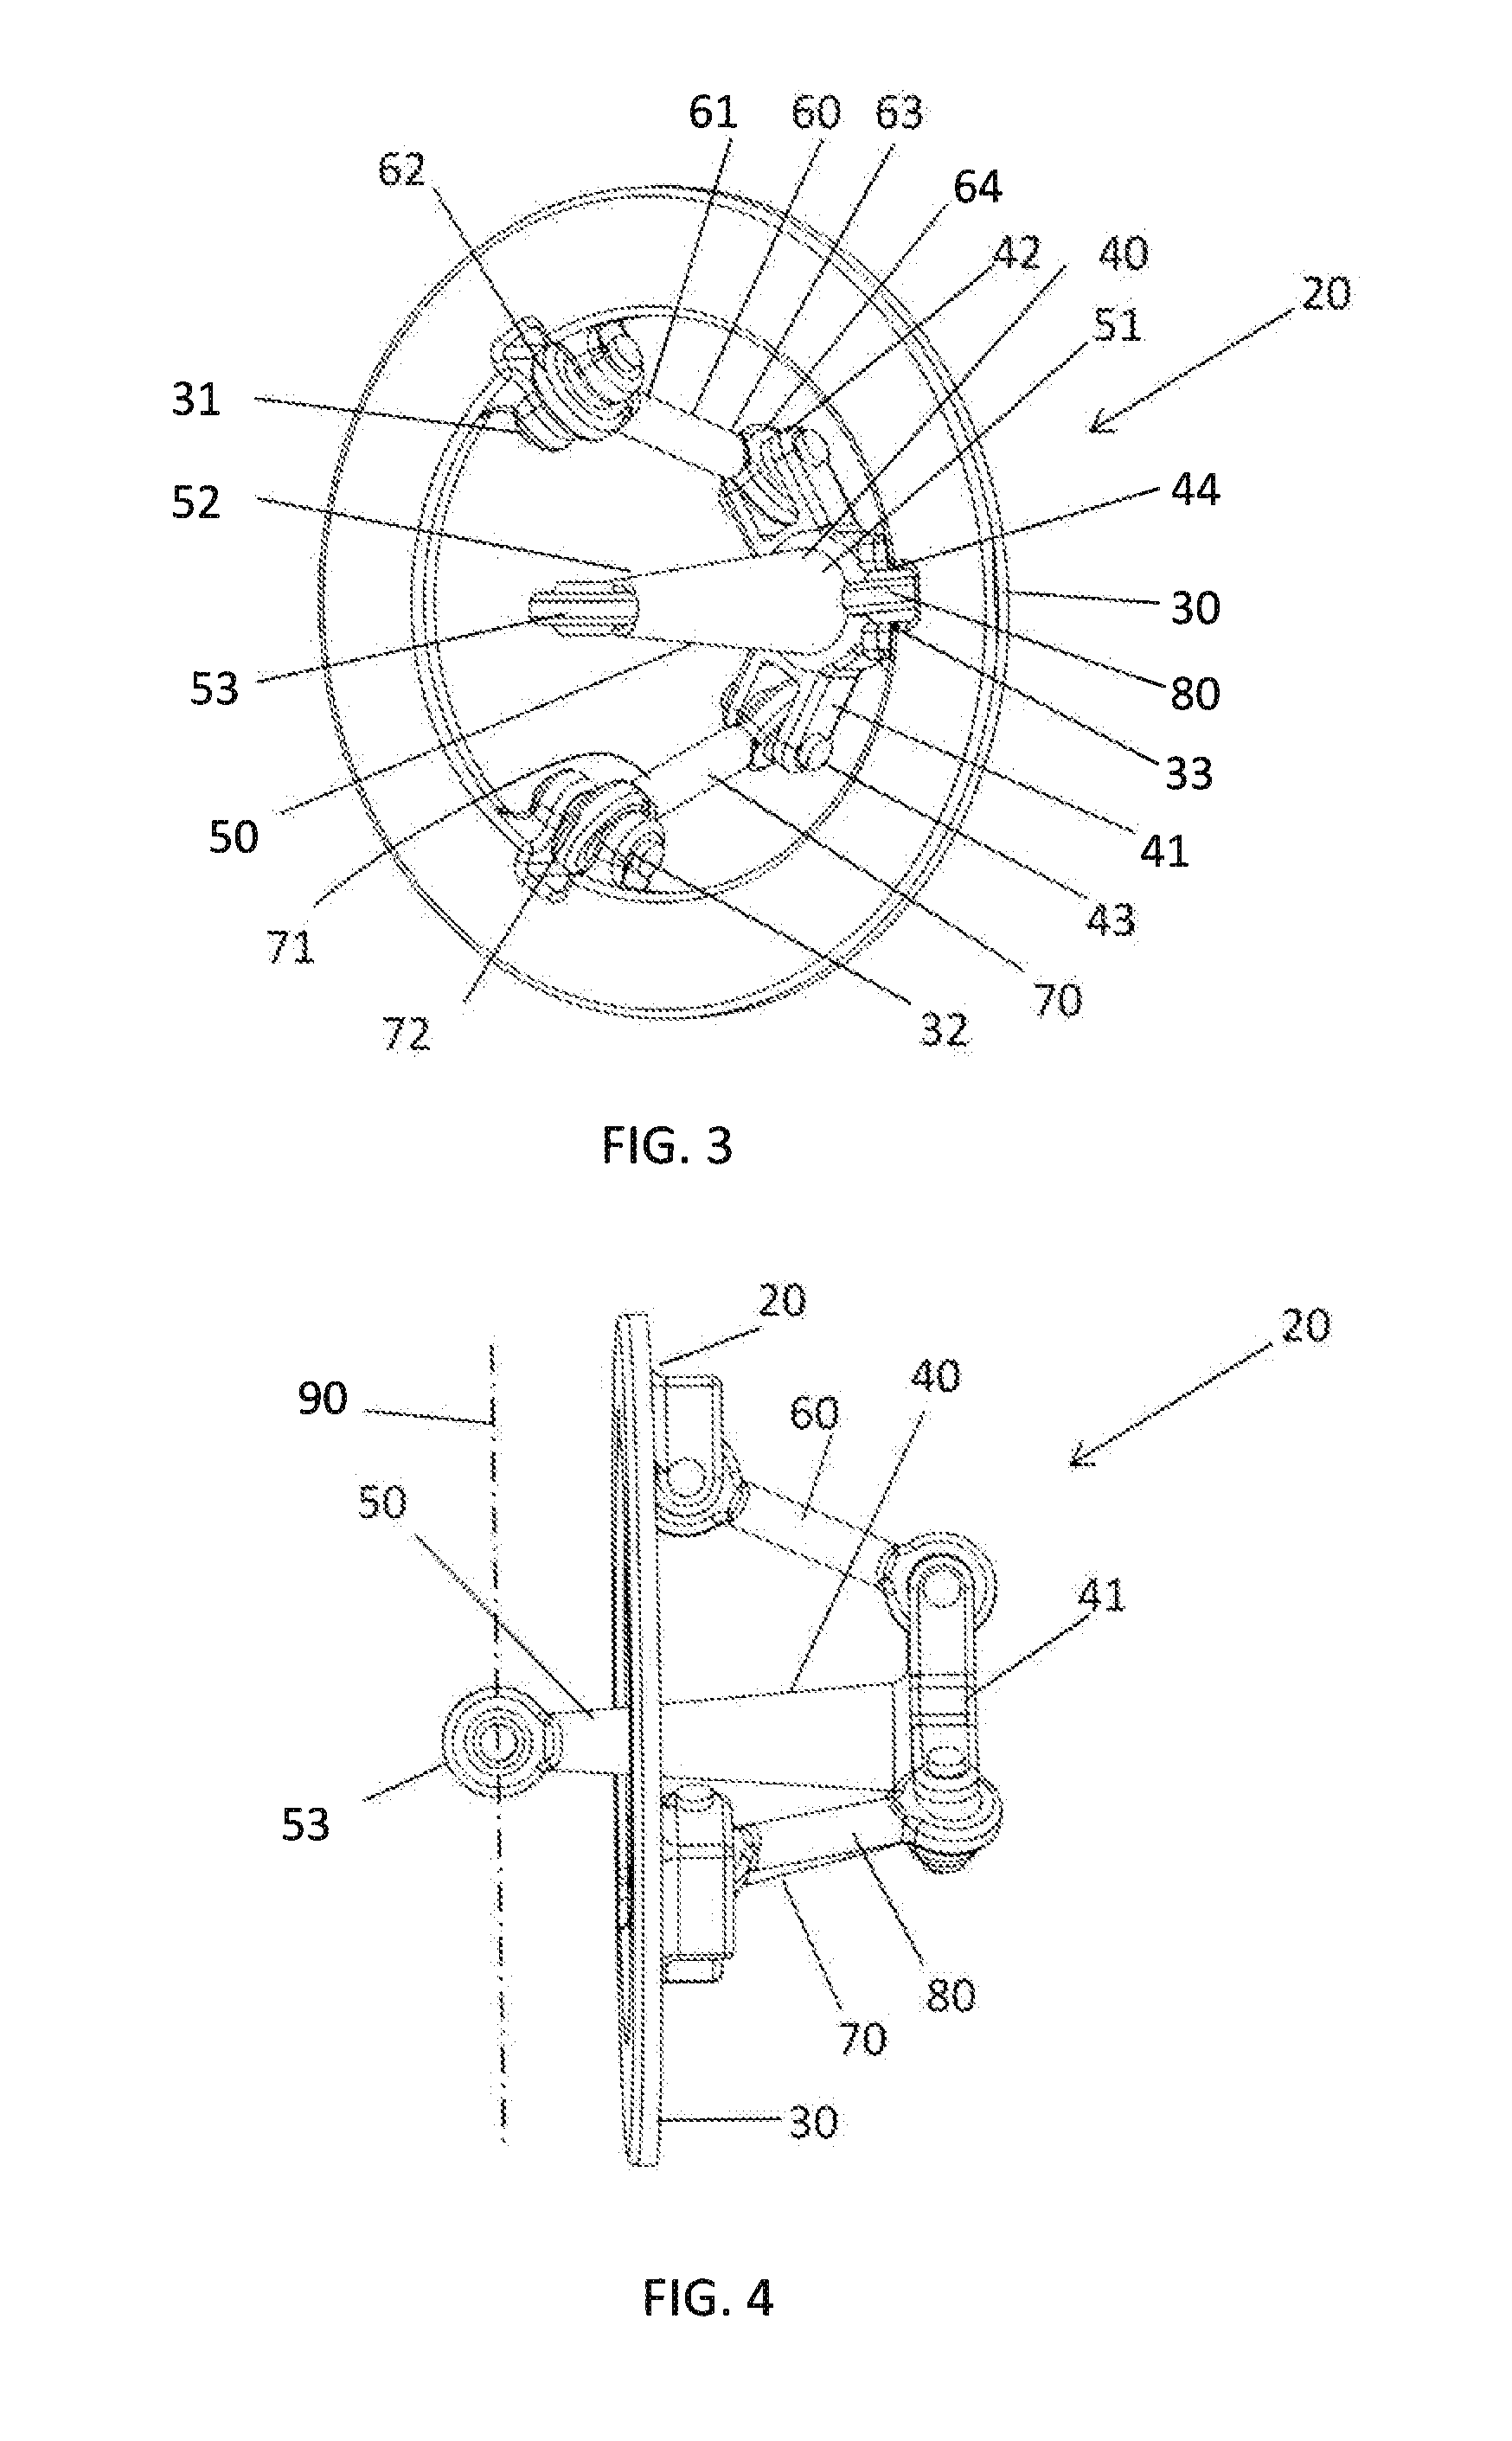 Planar Linkage, Methods of Decoupling, Mitigating Shock and Resonance, and Controlling Agricultural Spray Booms Mounted on Ground Vehicles